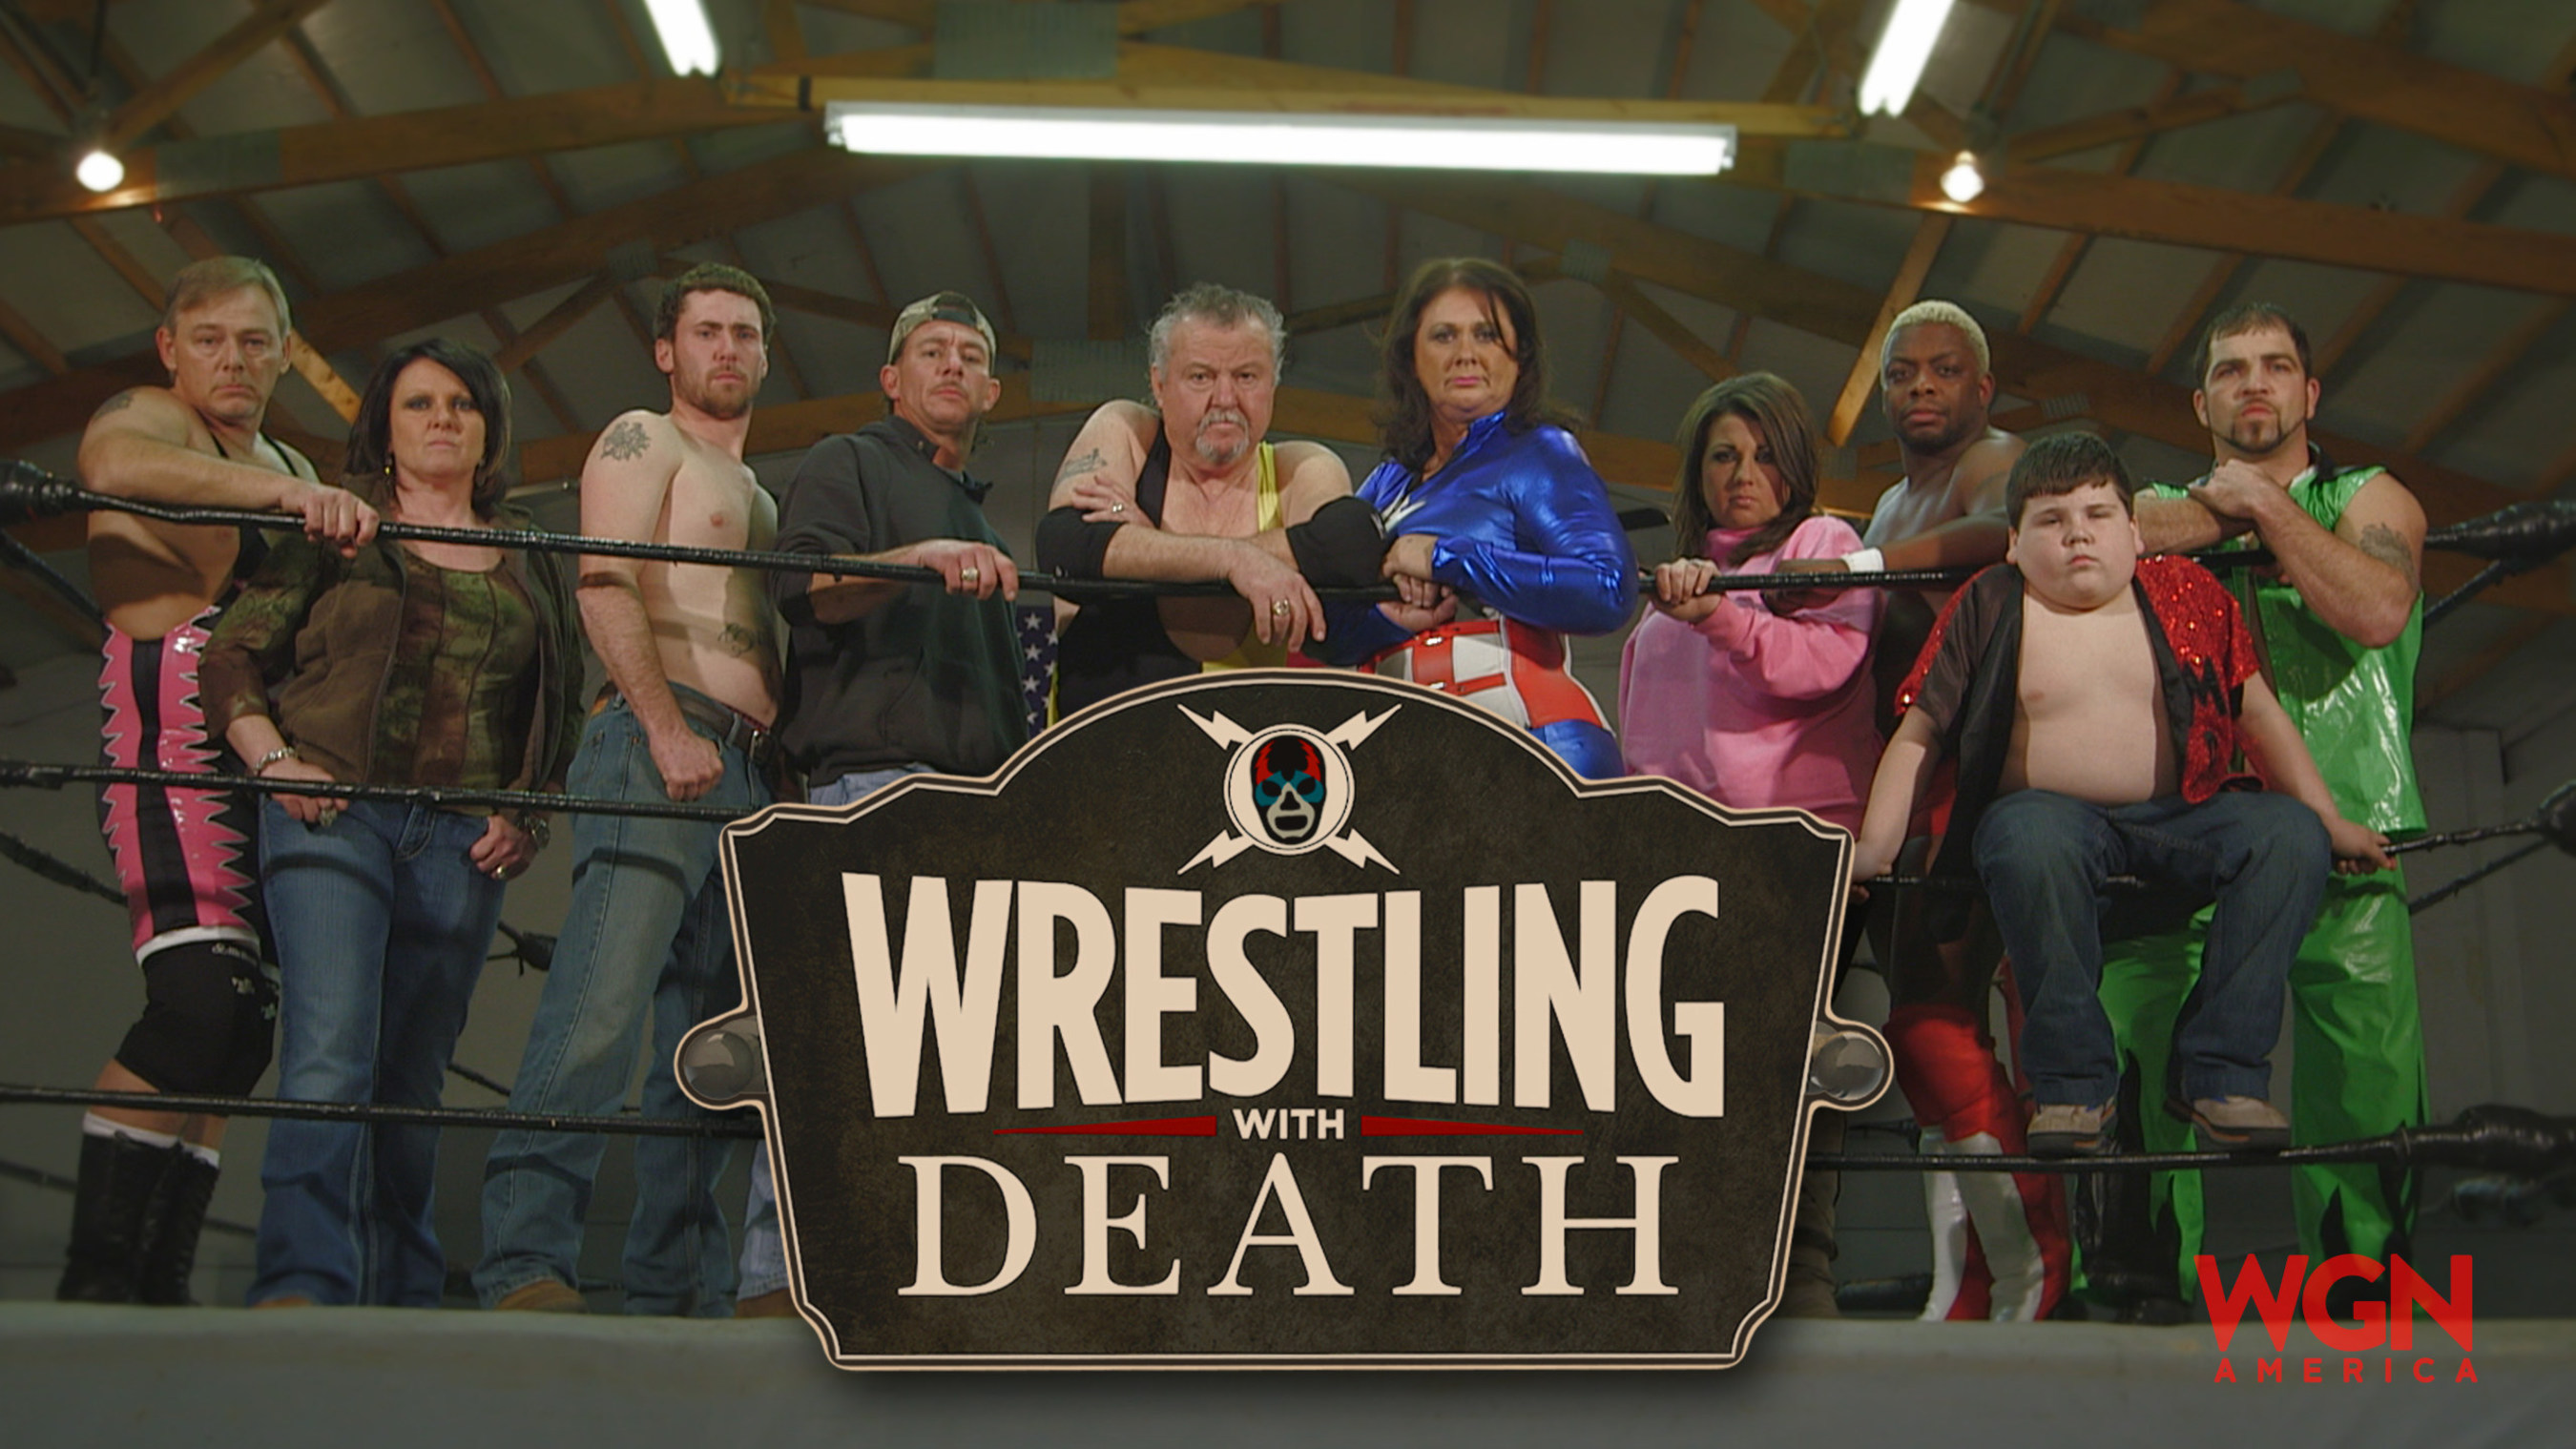 WGN America's "Wrestling with Death" premieres Tuesday, January 13 (10 p.m. ET / 9 p.m. CT).